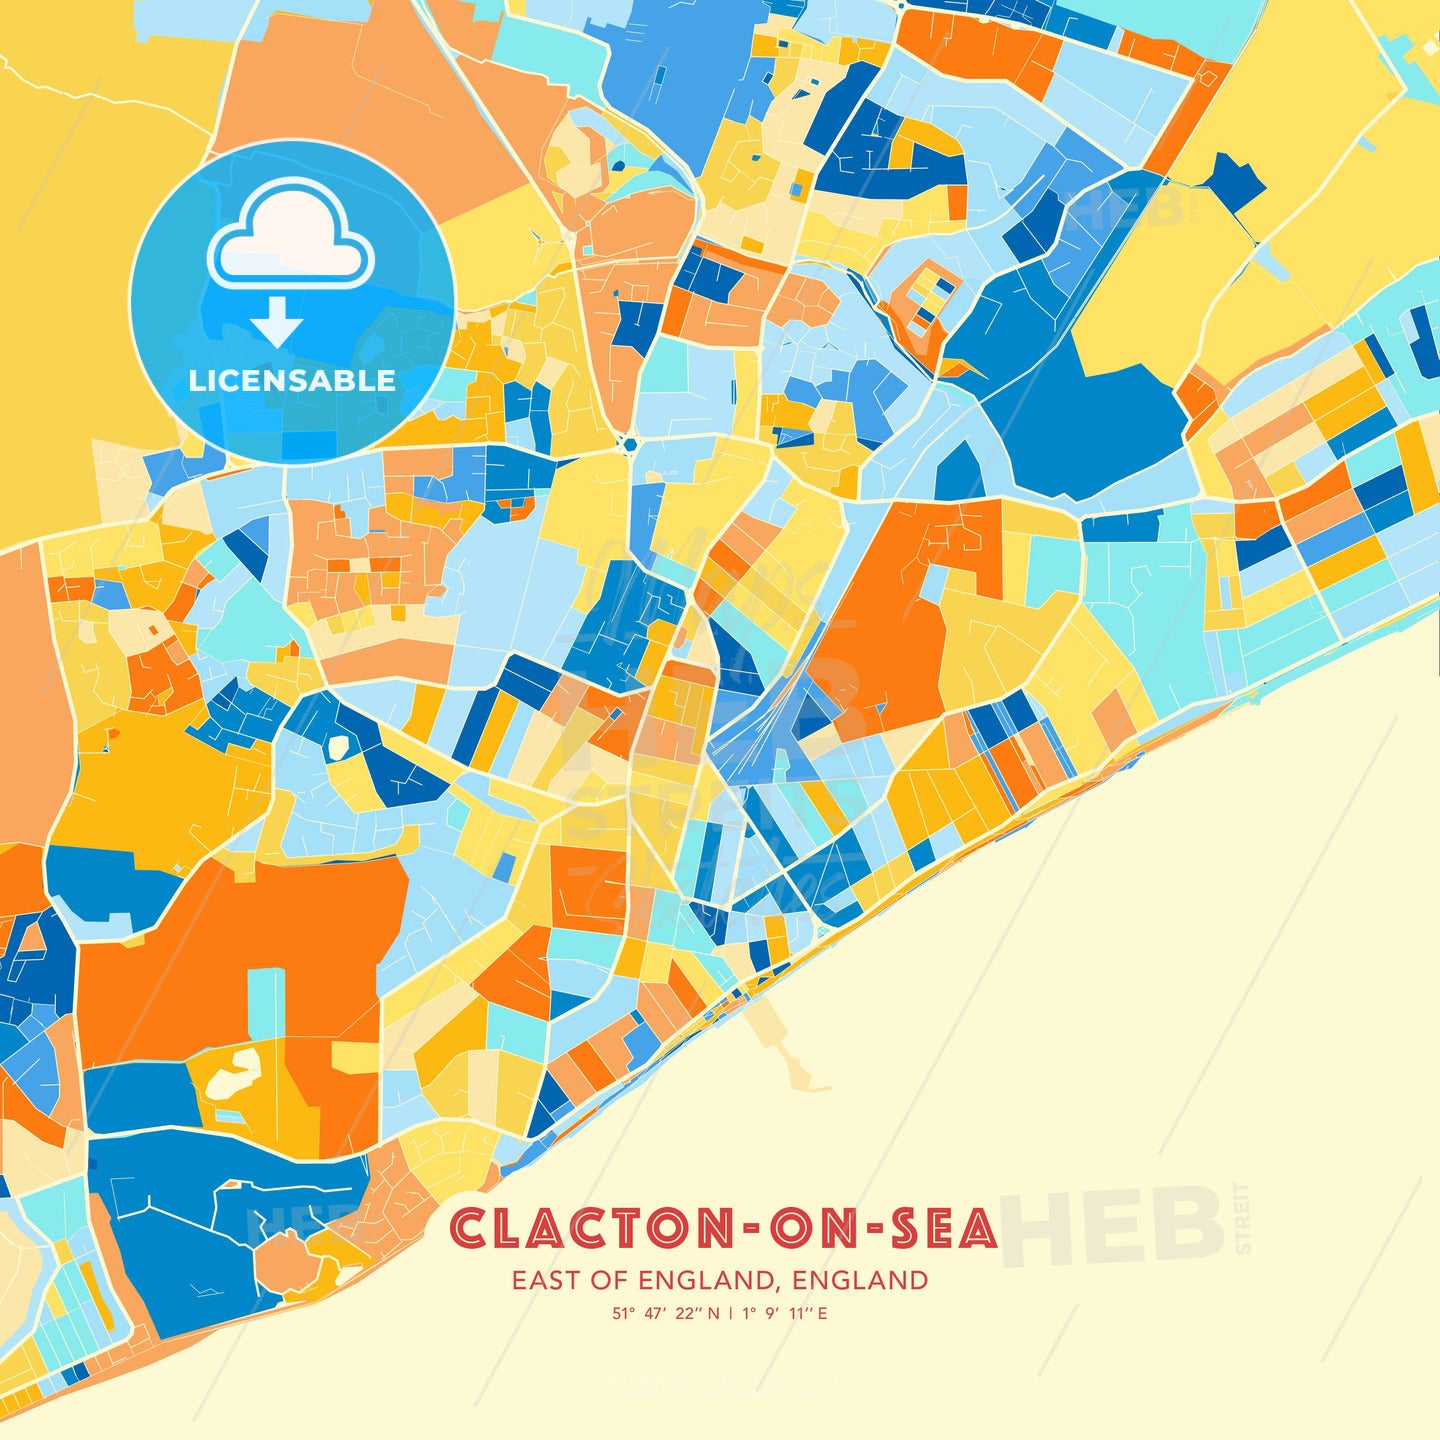 Clacton-on-Sea, East of England, England, map - HEBSTREITS Sketches